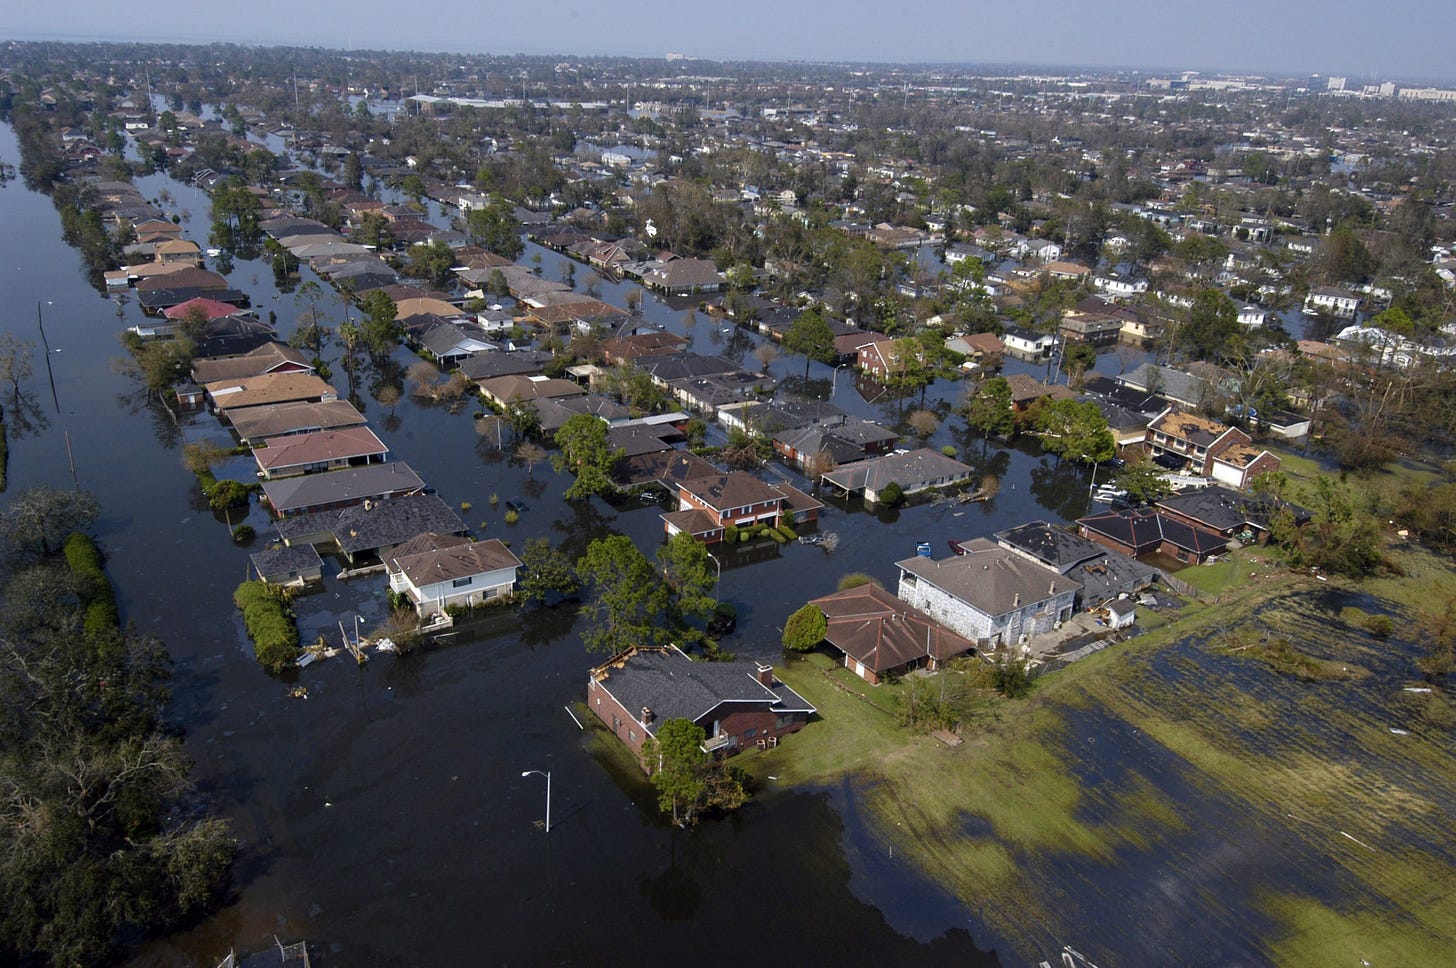 Flooding Likely to Hit Affordable Housing Hardest - Stormwater Report